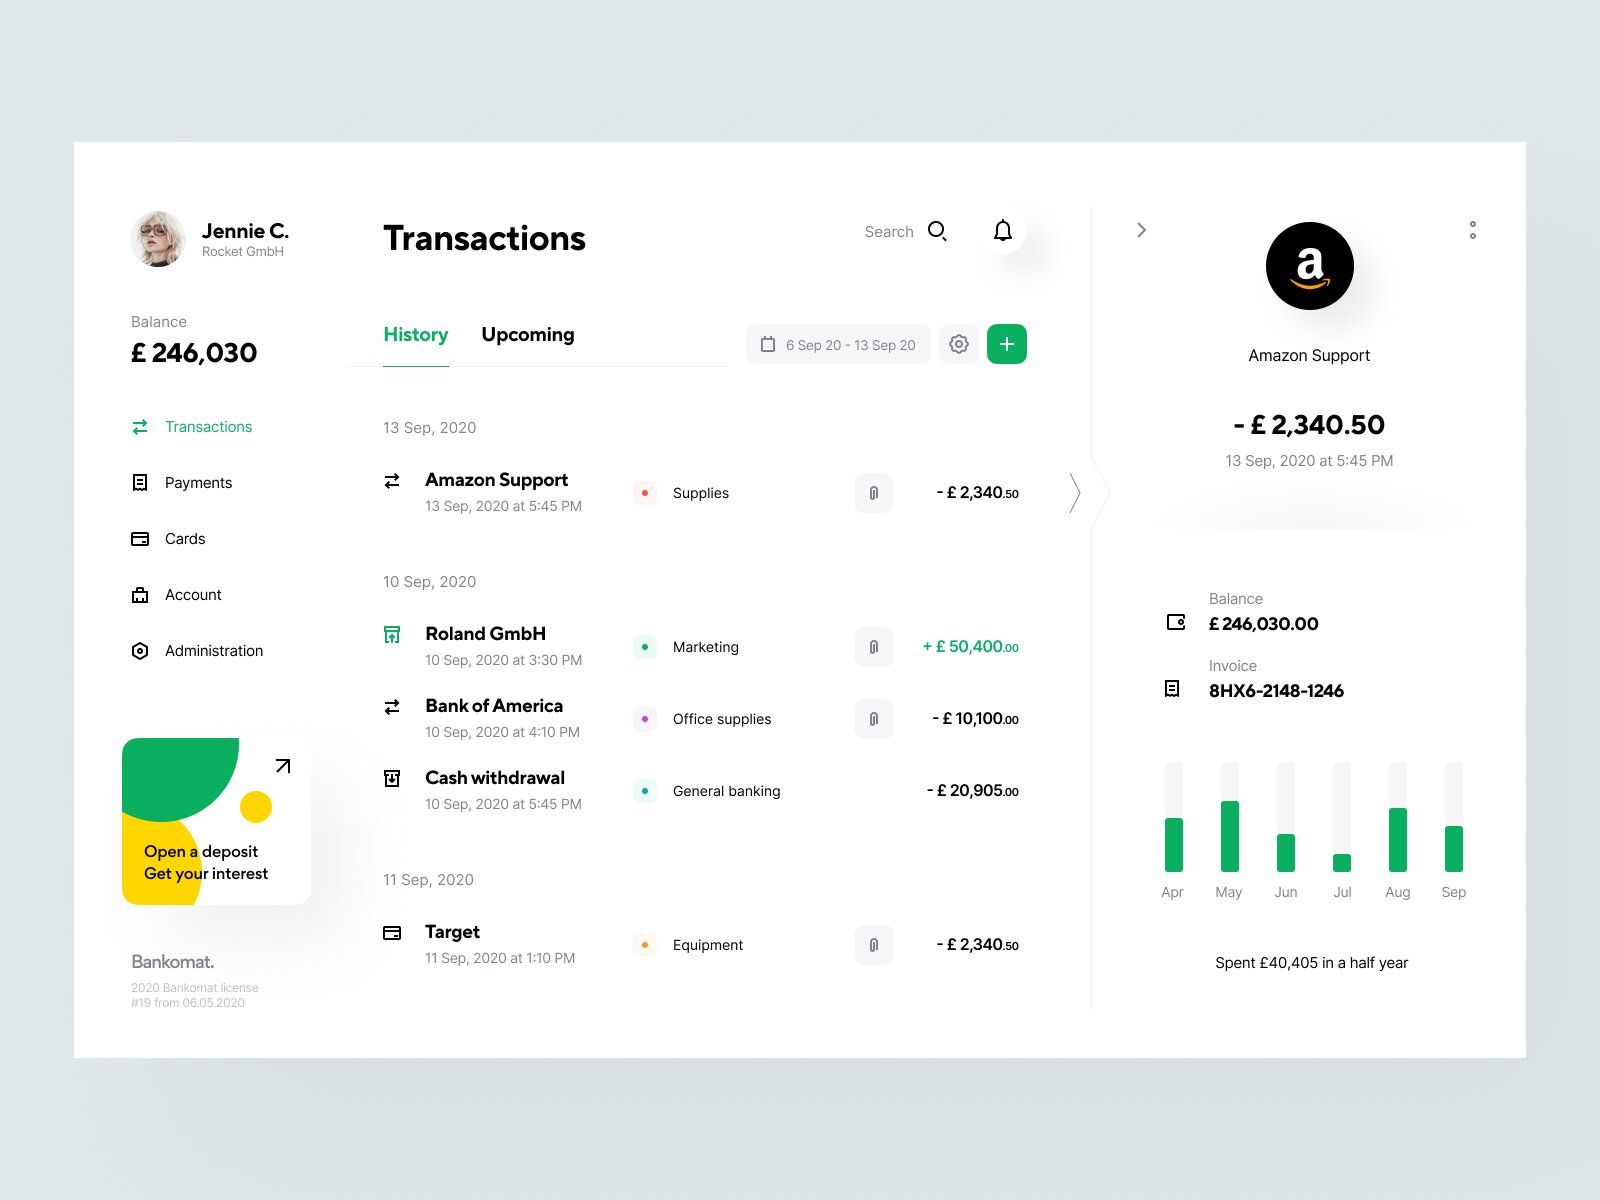 Transactions history of a financial site should contain all necessary information about them for great experience for customers (*image by [Vladimir Gruev](https://dribbble.com/gruev){ rel="nofollow" .default-md}*)